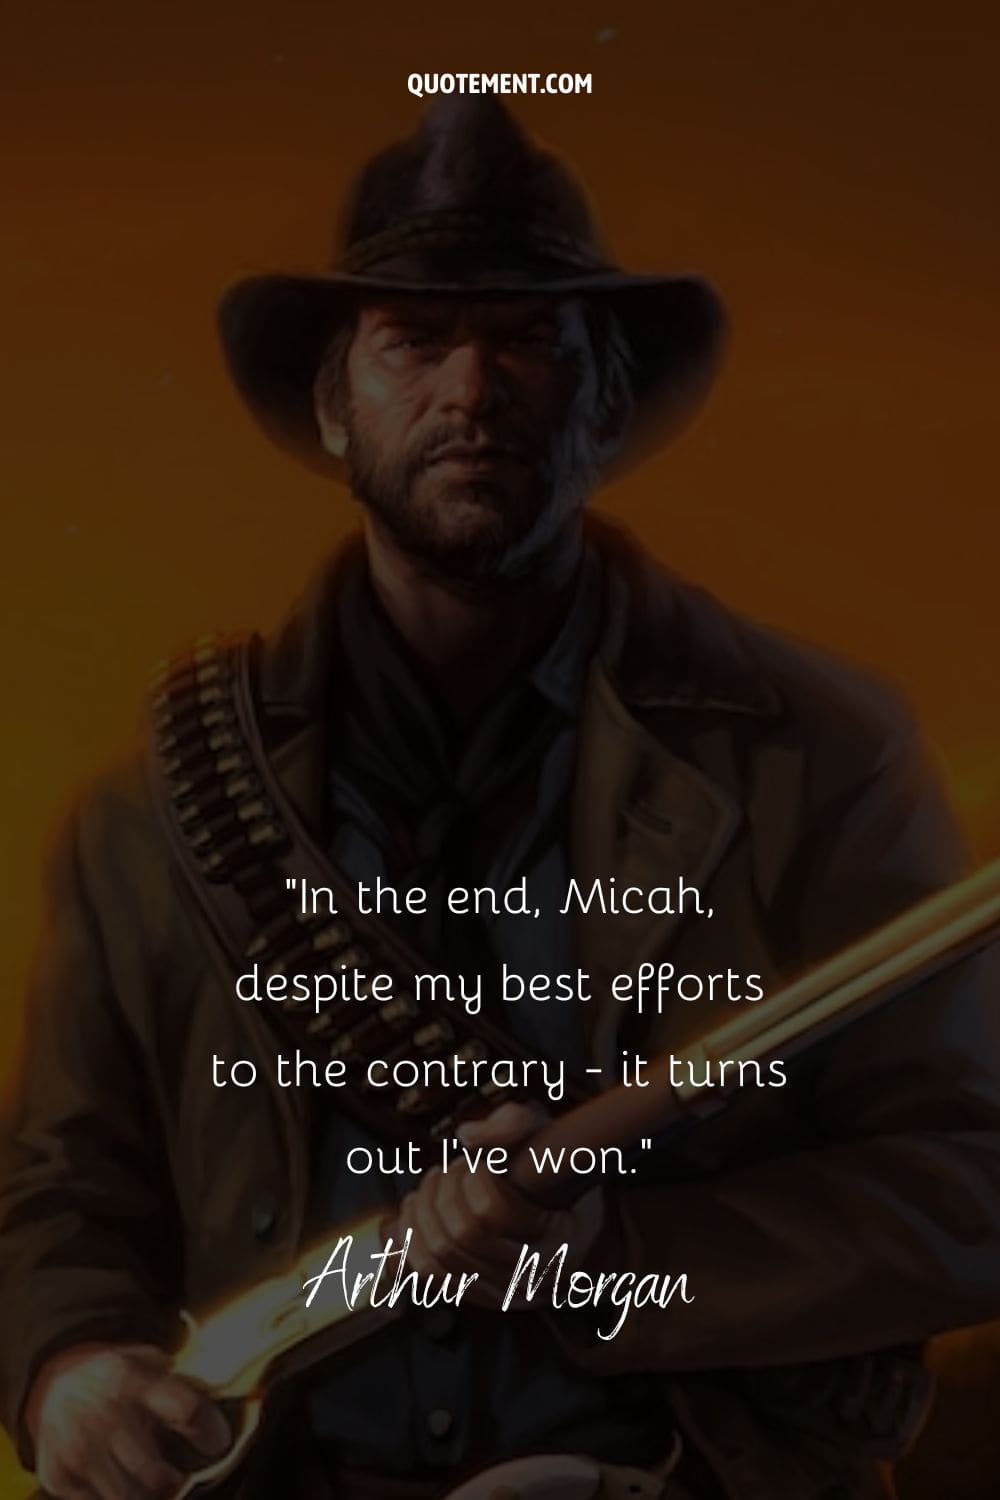 80 Unforgettable Arthur Morgan Quotes On Life And Survival